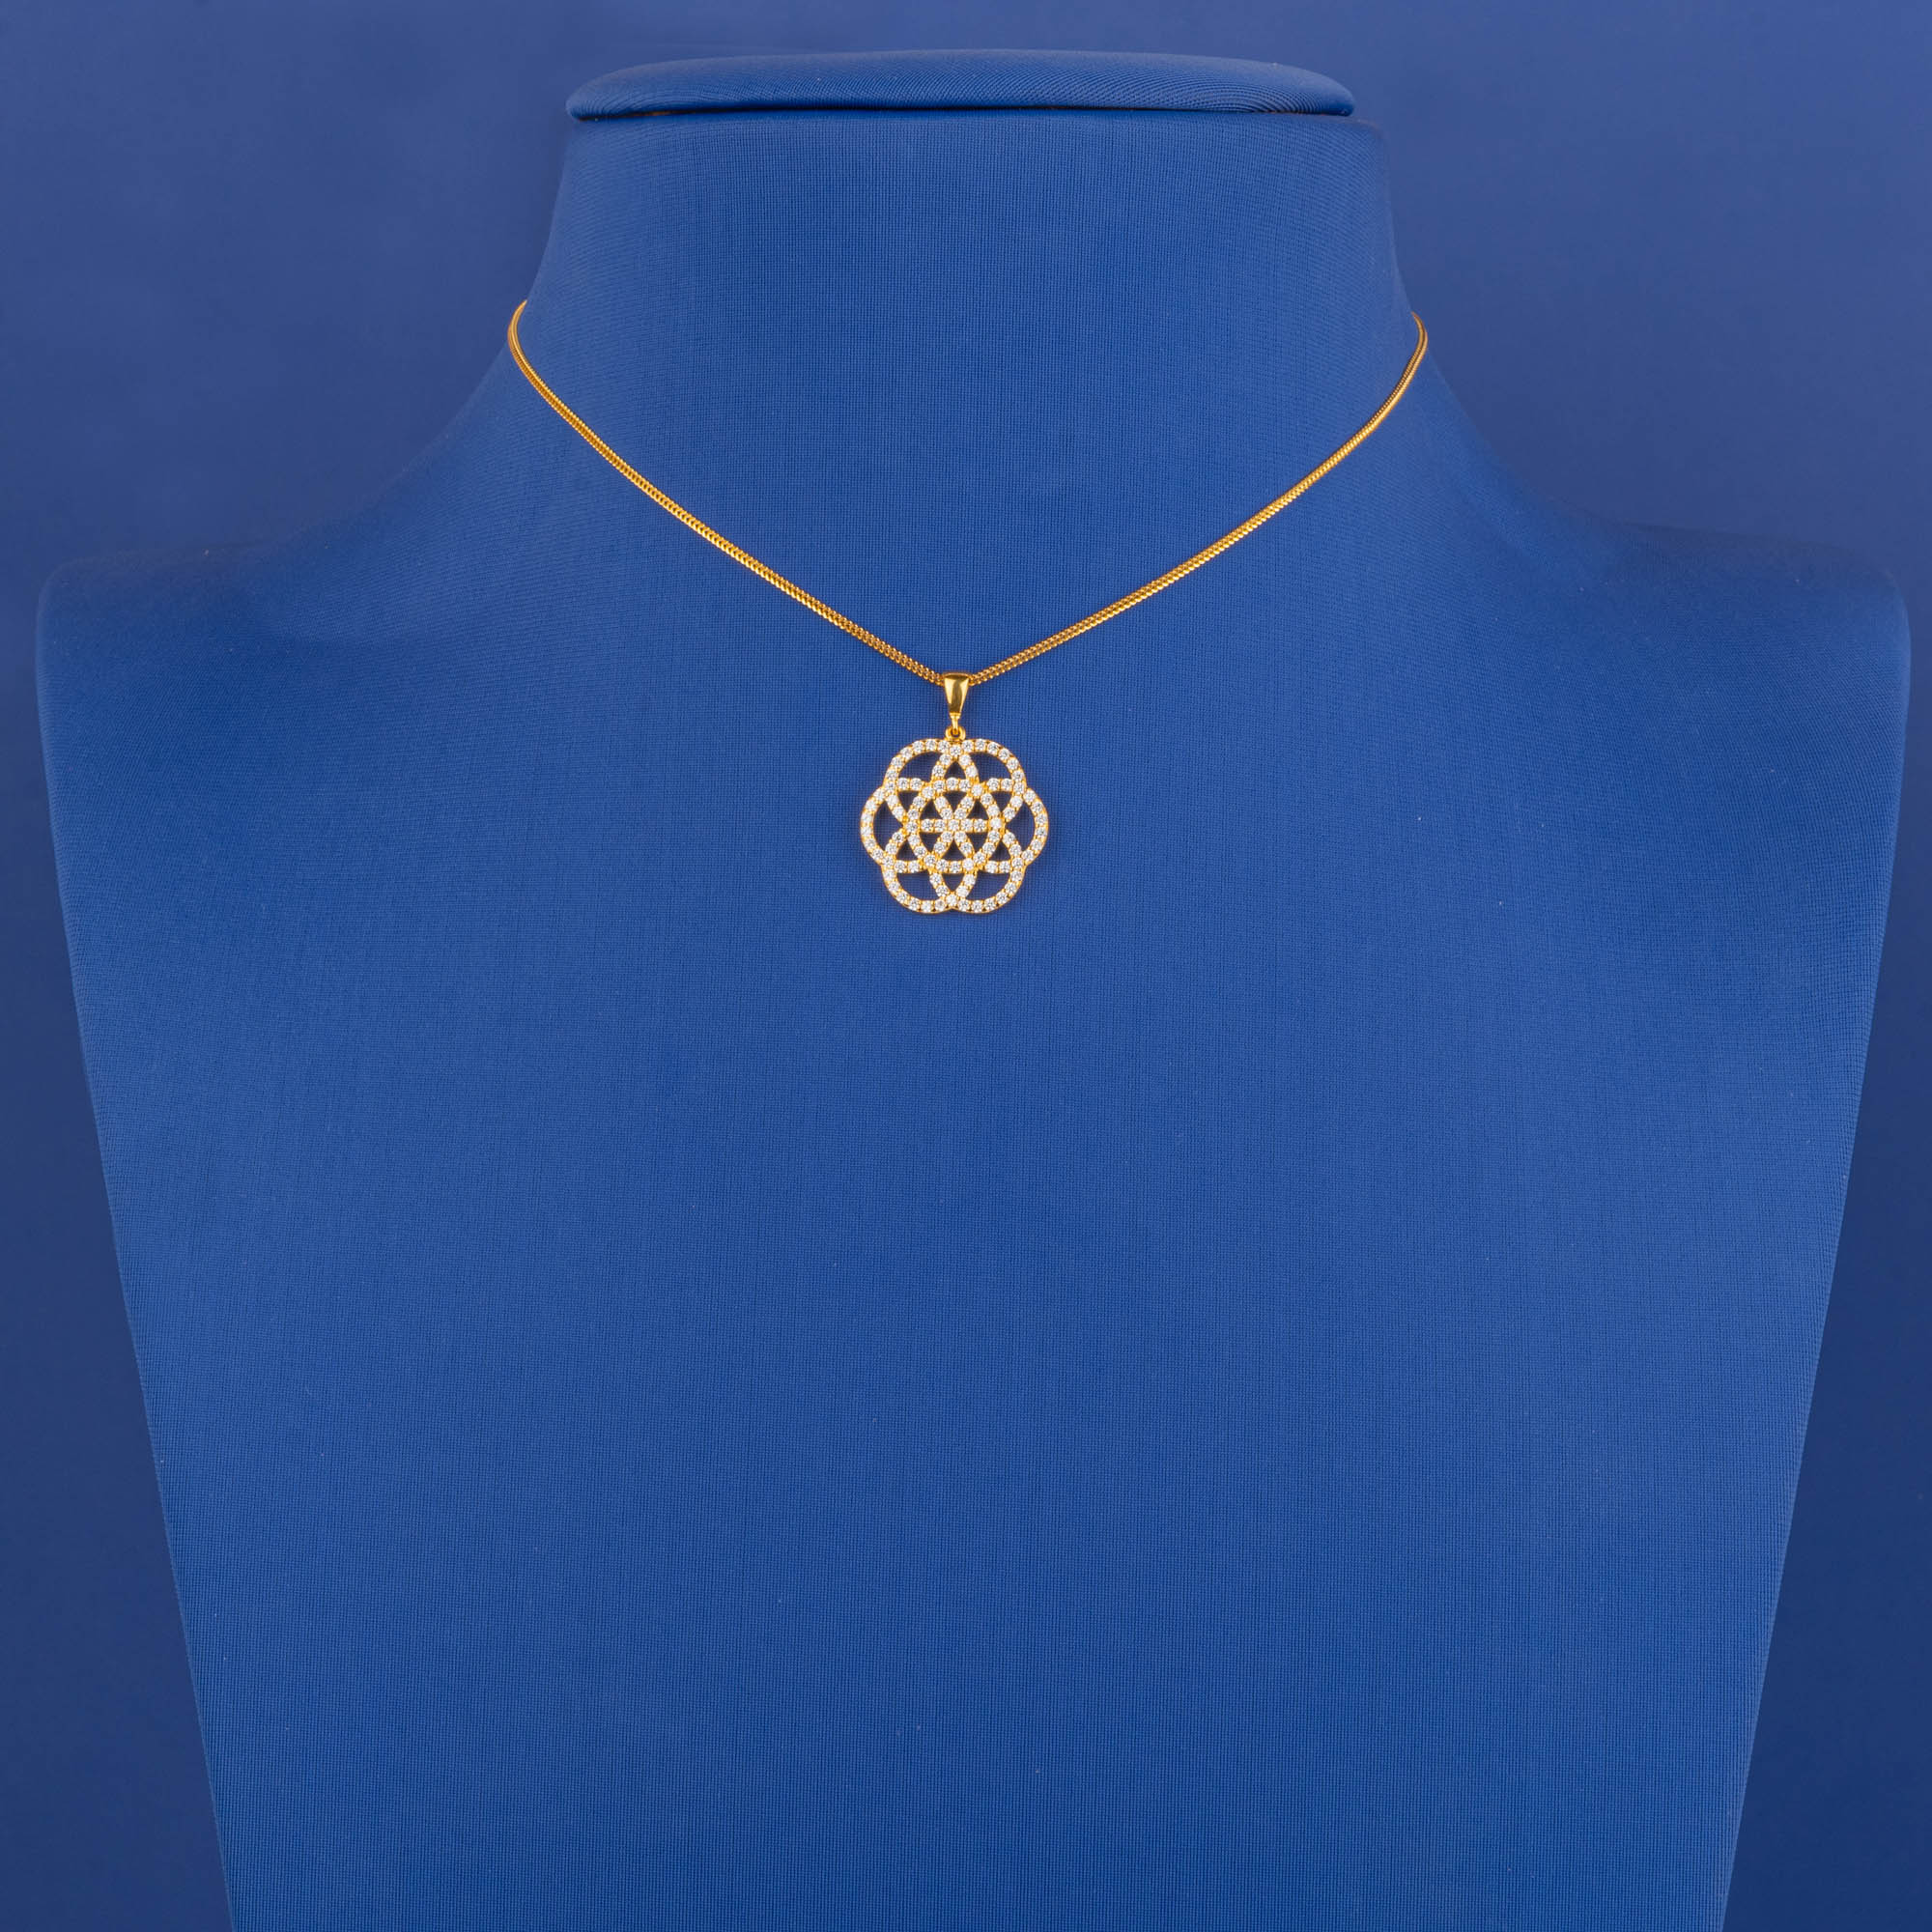 Radiant Illusion: Artisanal 22K Gold Cz Pendant (chain not included)